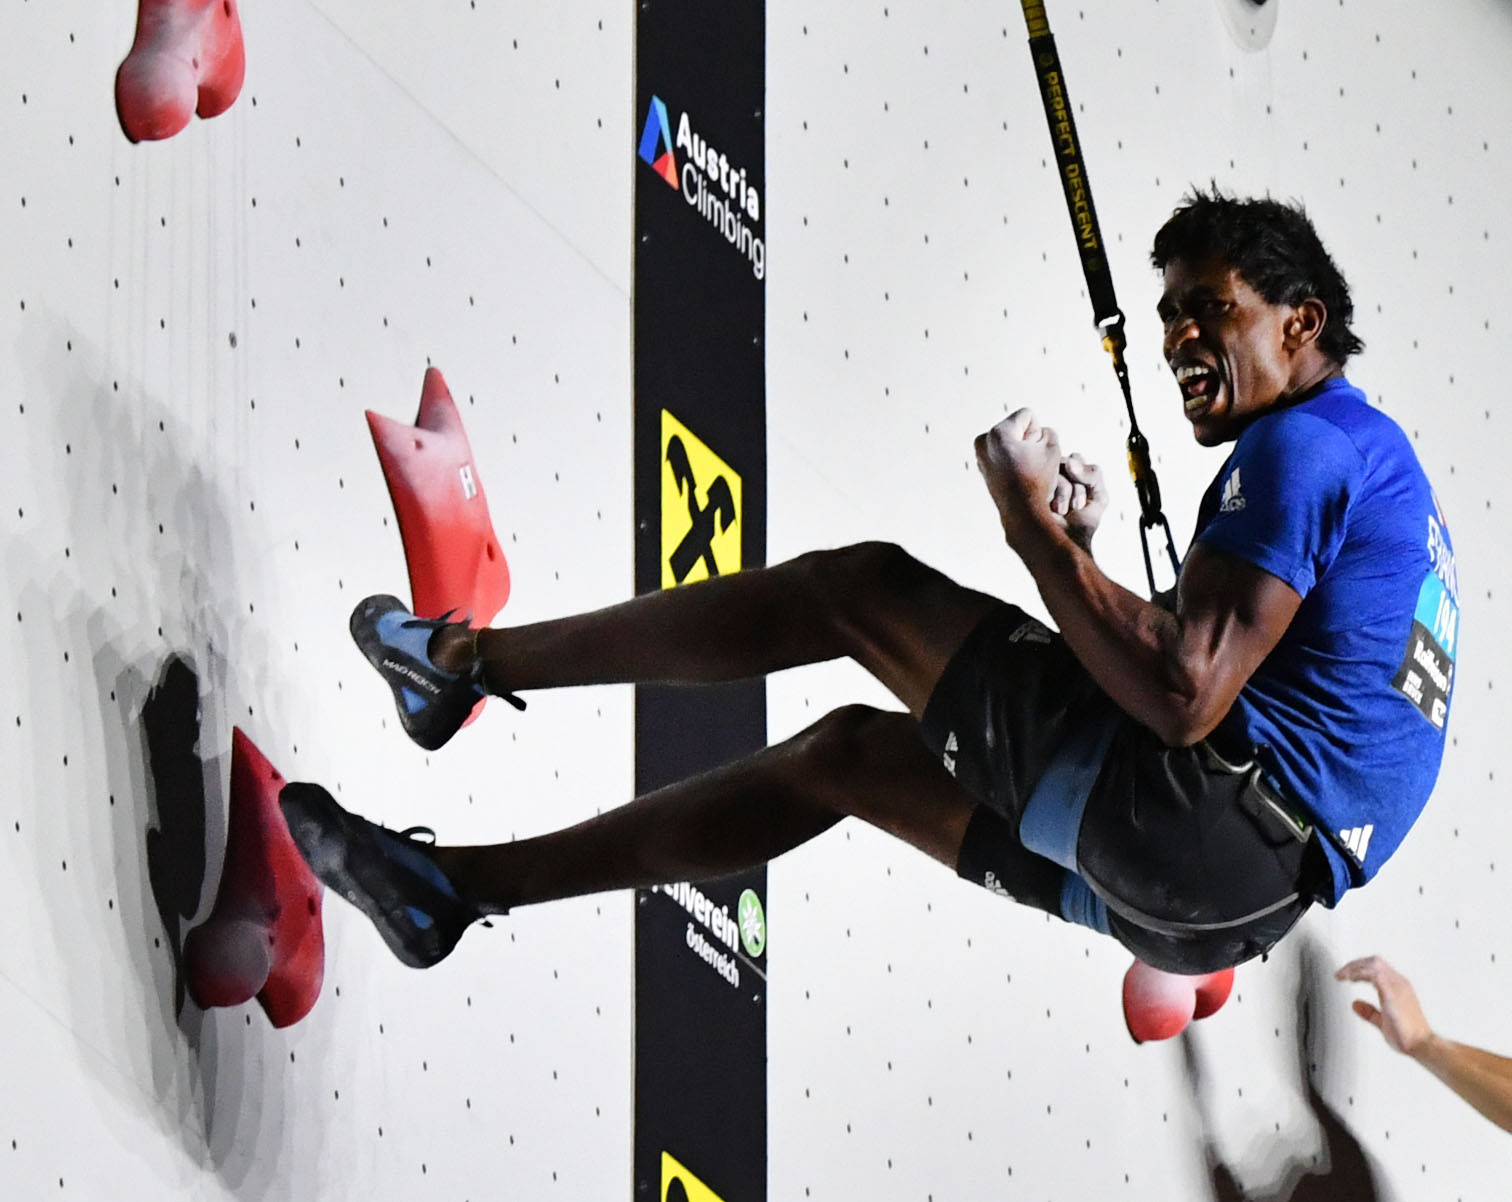 World number one Mawem triumphs at IFSC Climbing World Cup in Moscow 